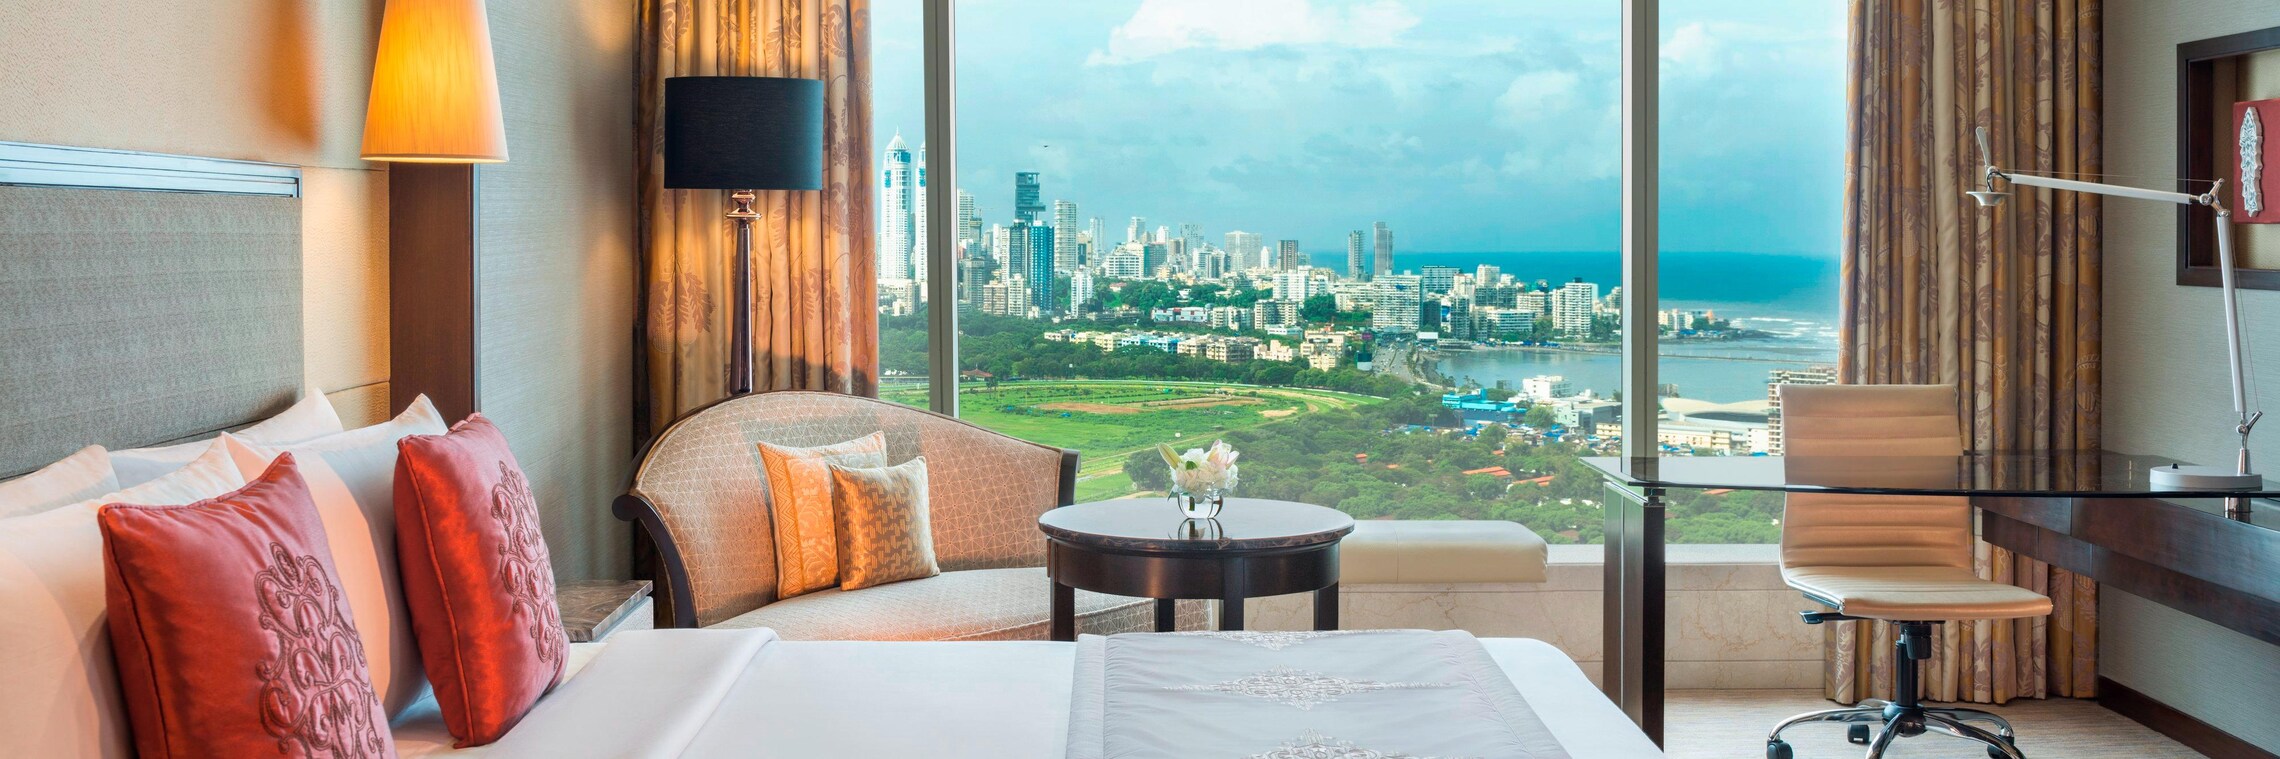 Grand Deluxe Room - City View